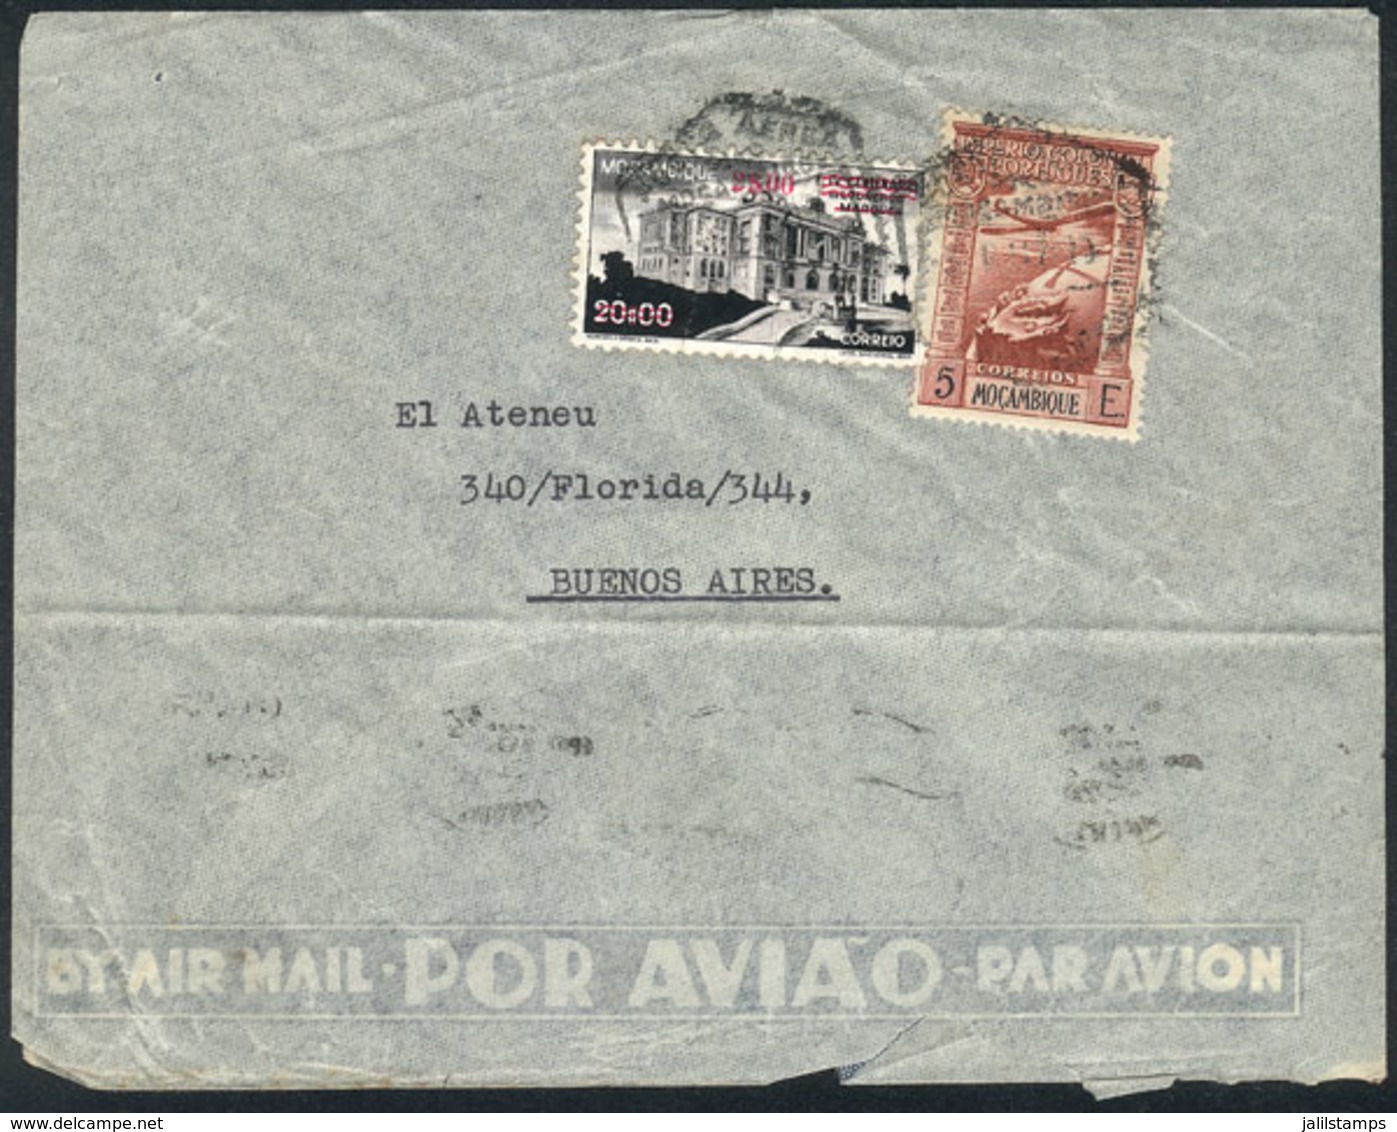 MOZAMBIQUE: Airmail Cover Franked With 25E. Sent To Argentina In 1947, Minor Defects, Rare Destination! - Mozambique